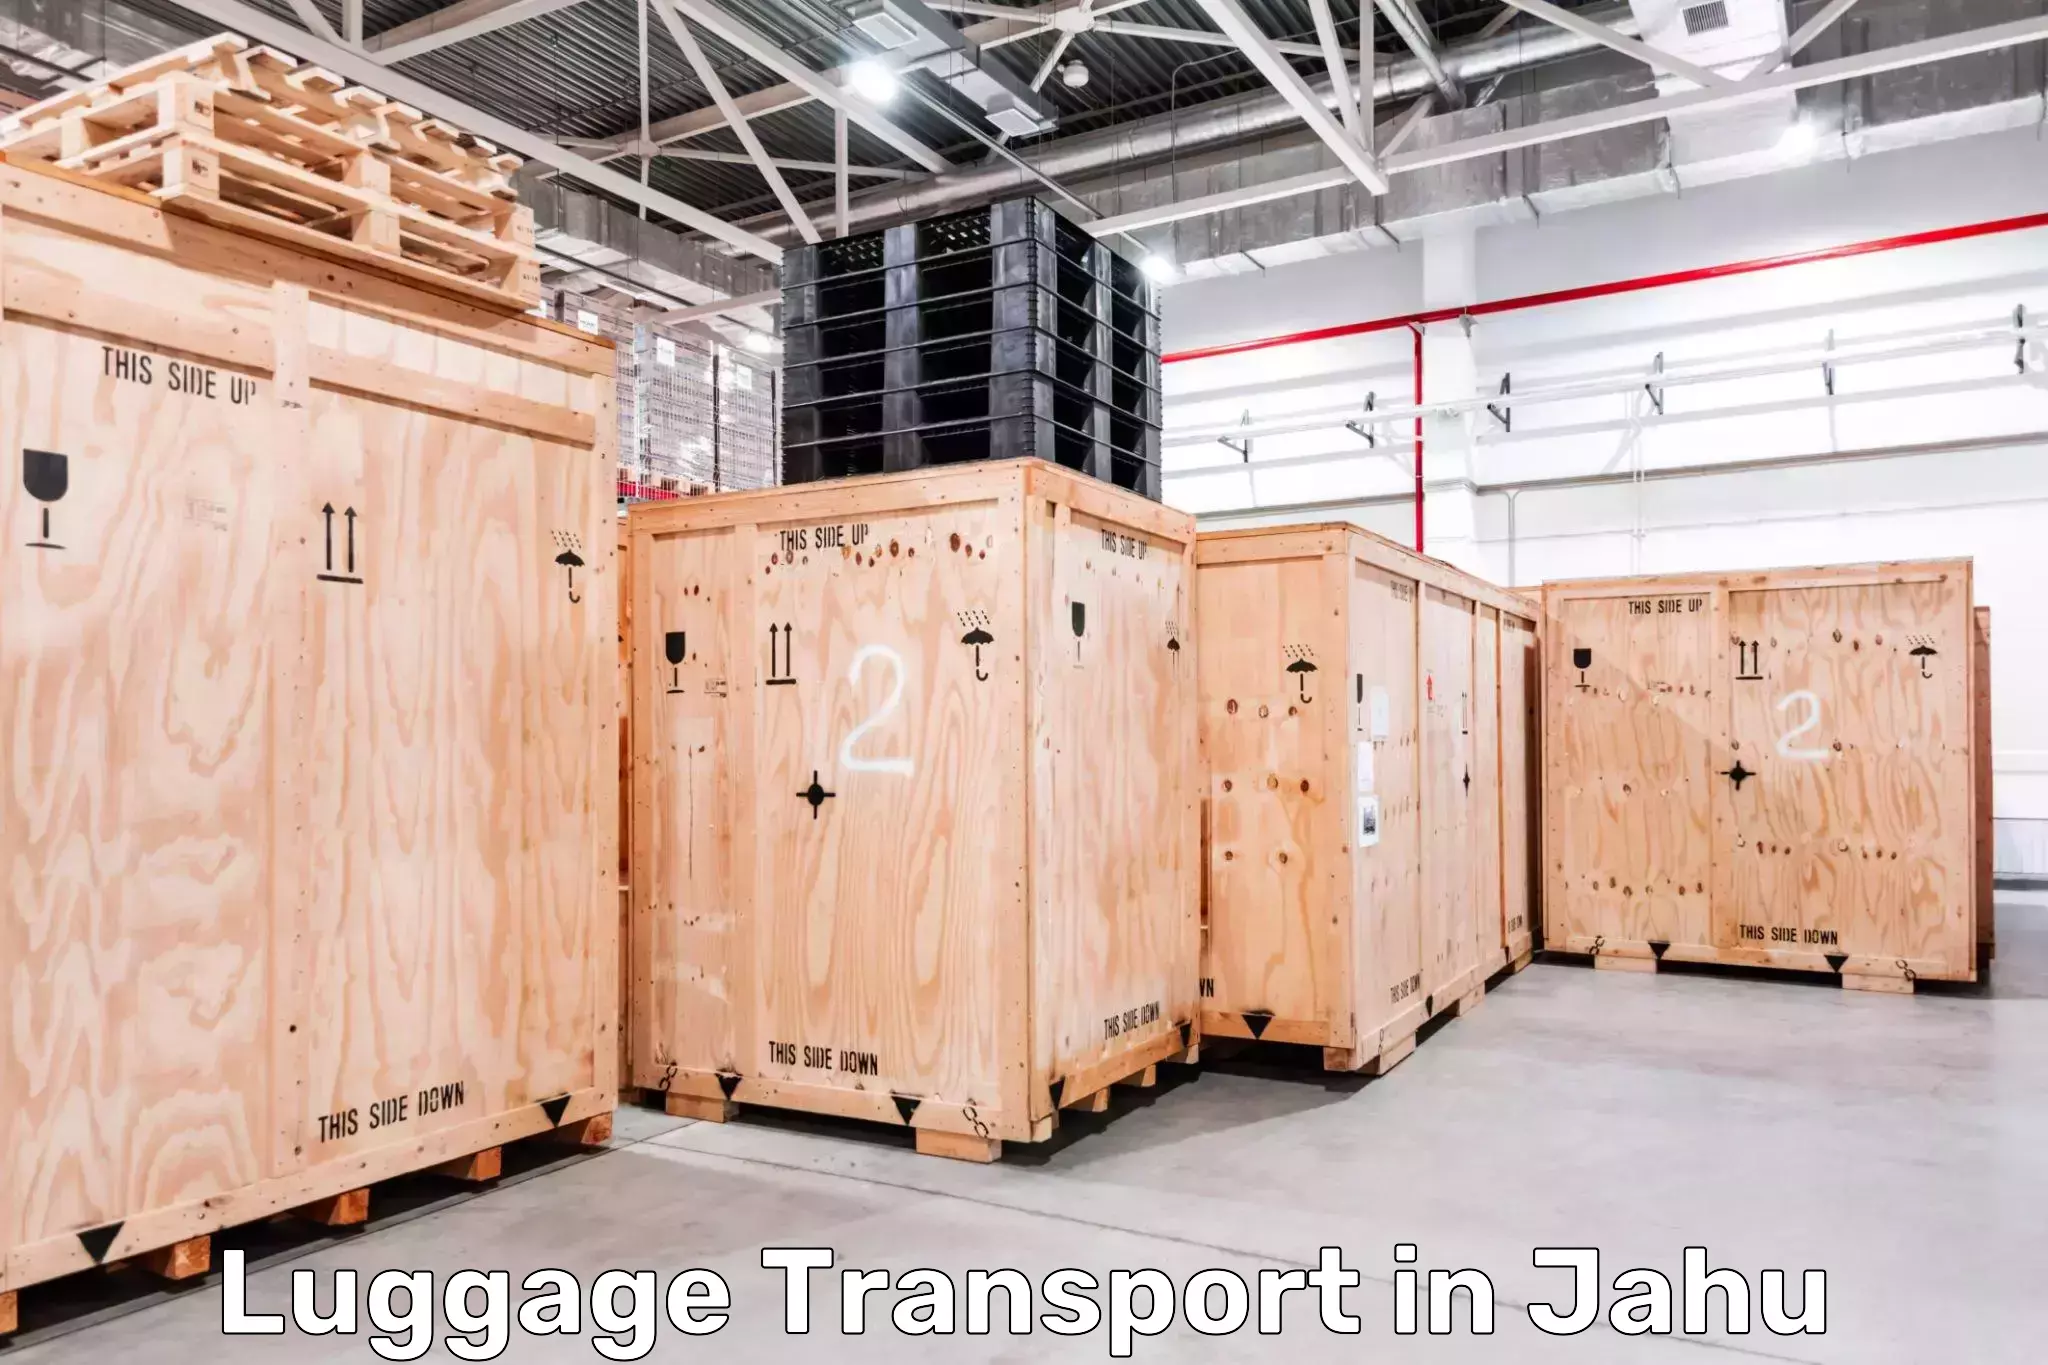 Luggage transfer service in Jahu